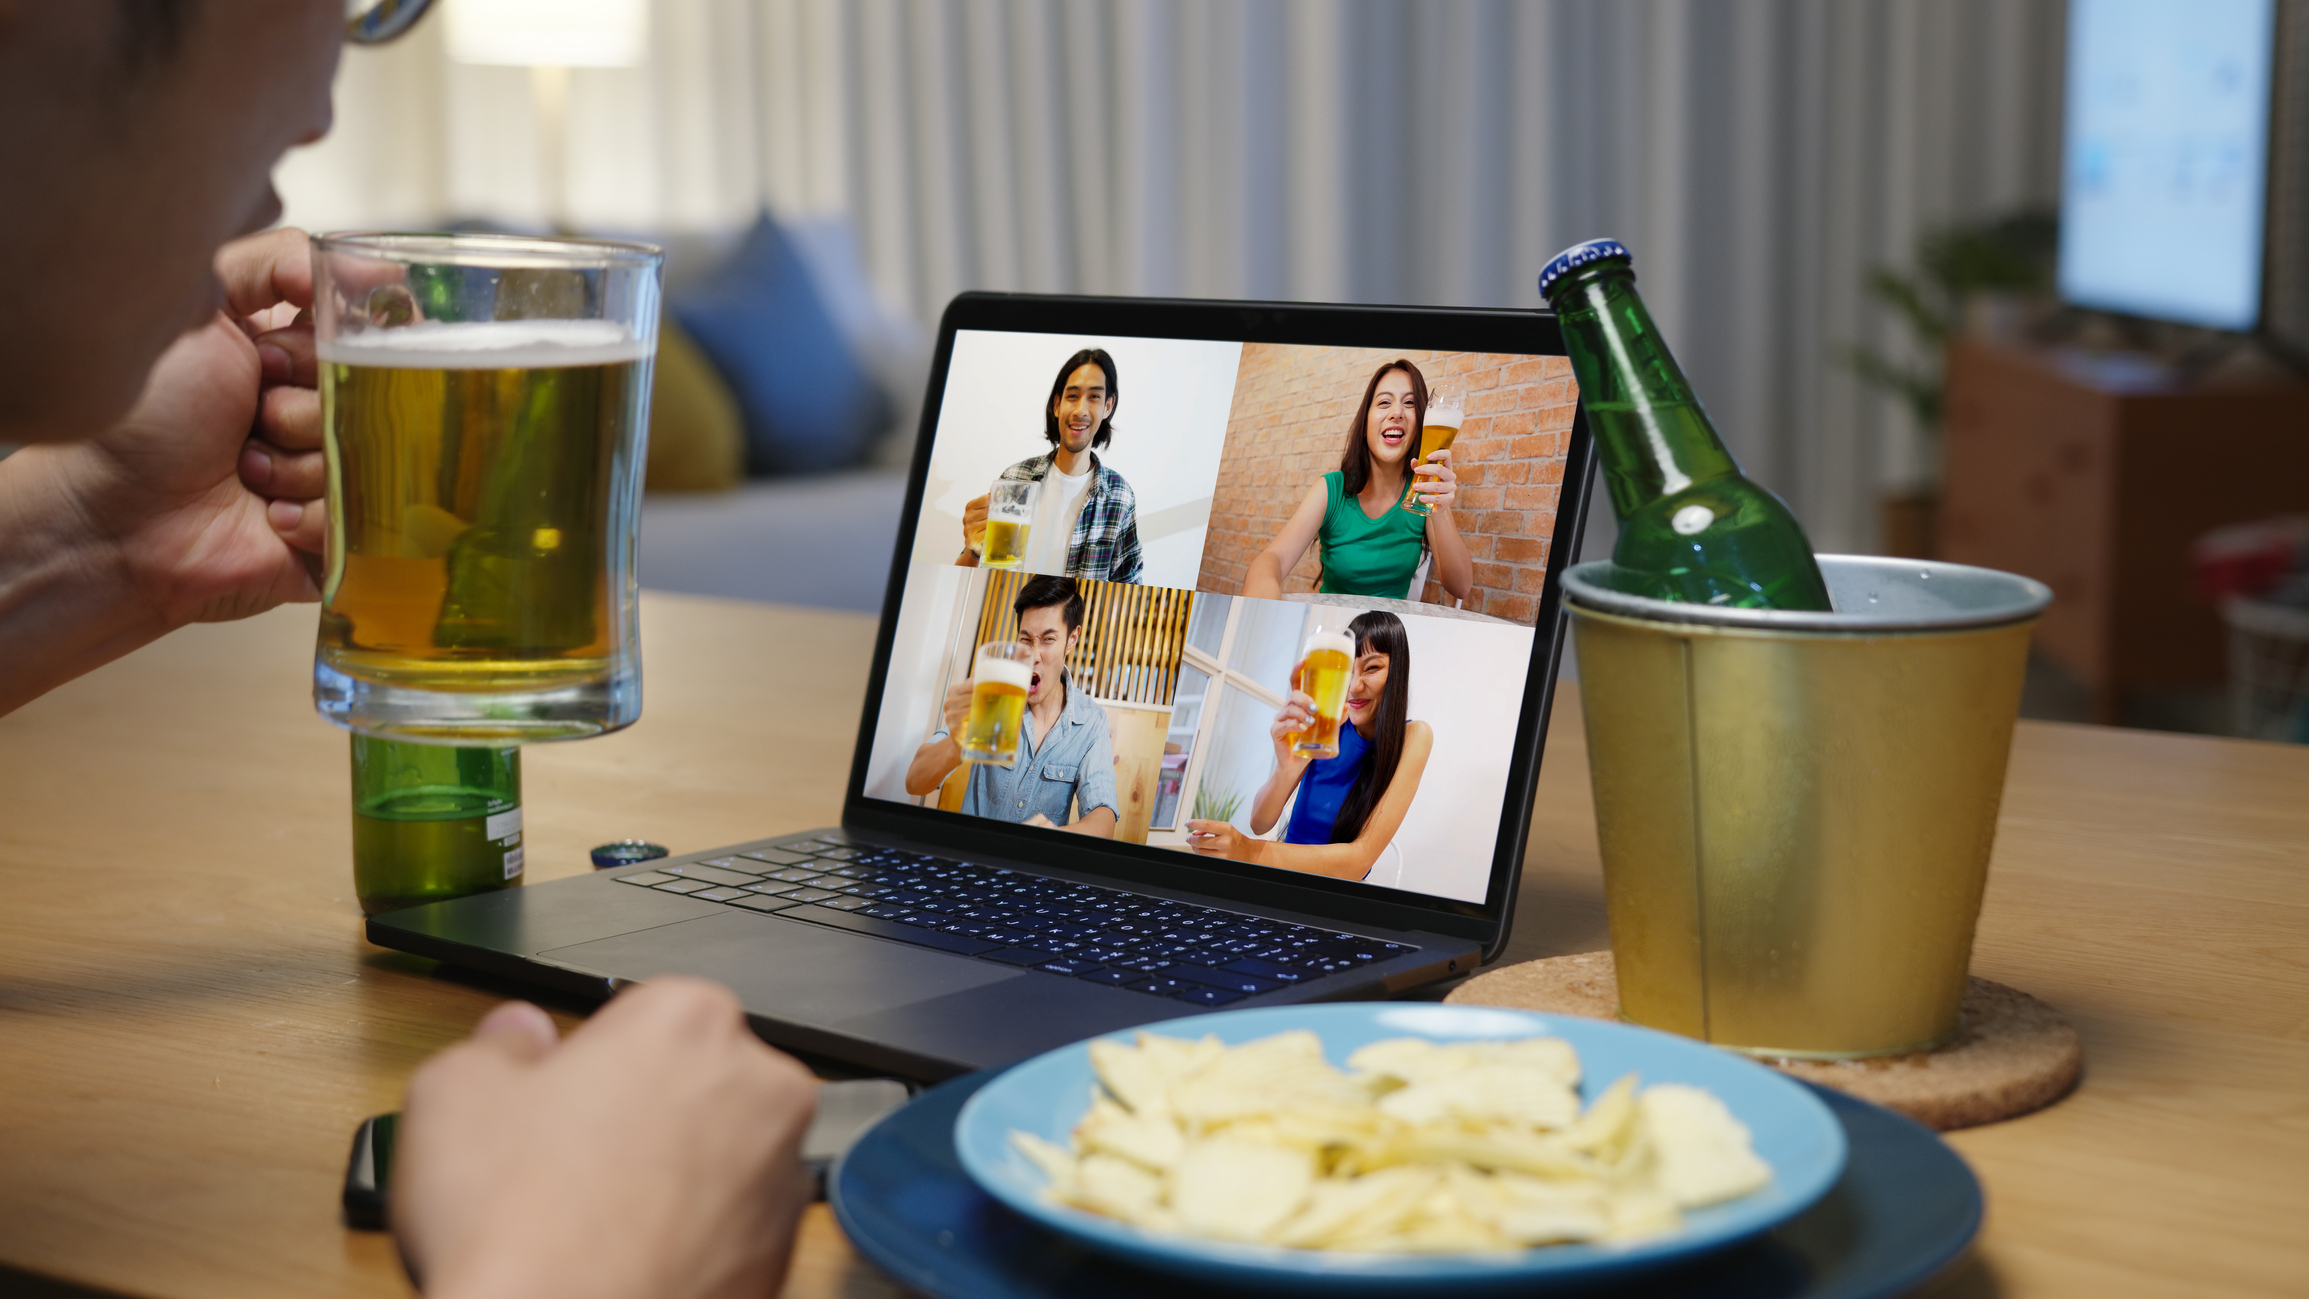 Young man joining virtual happy hour with friends